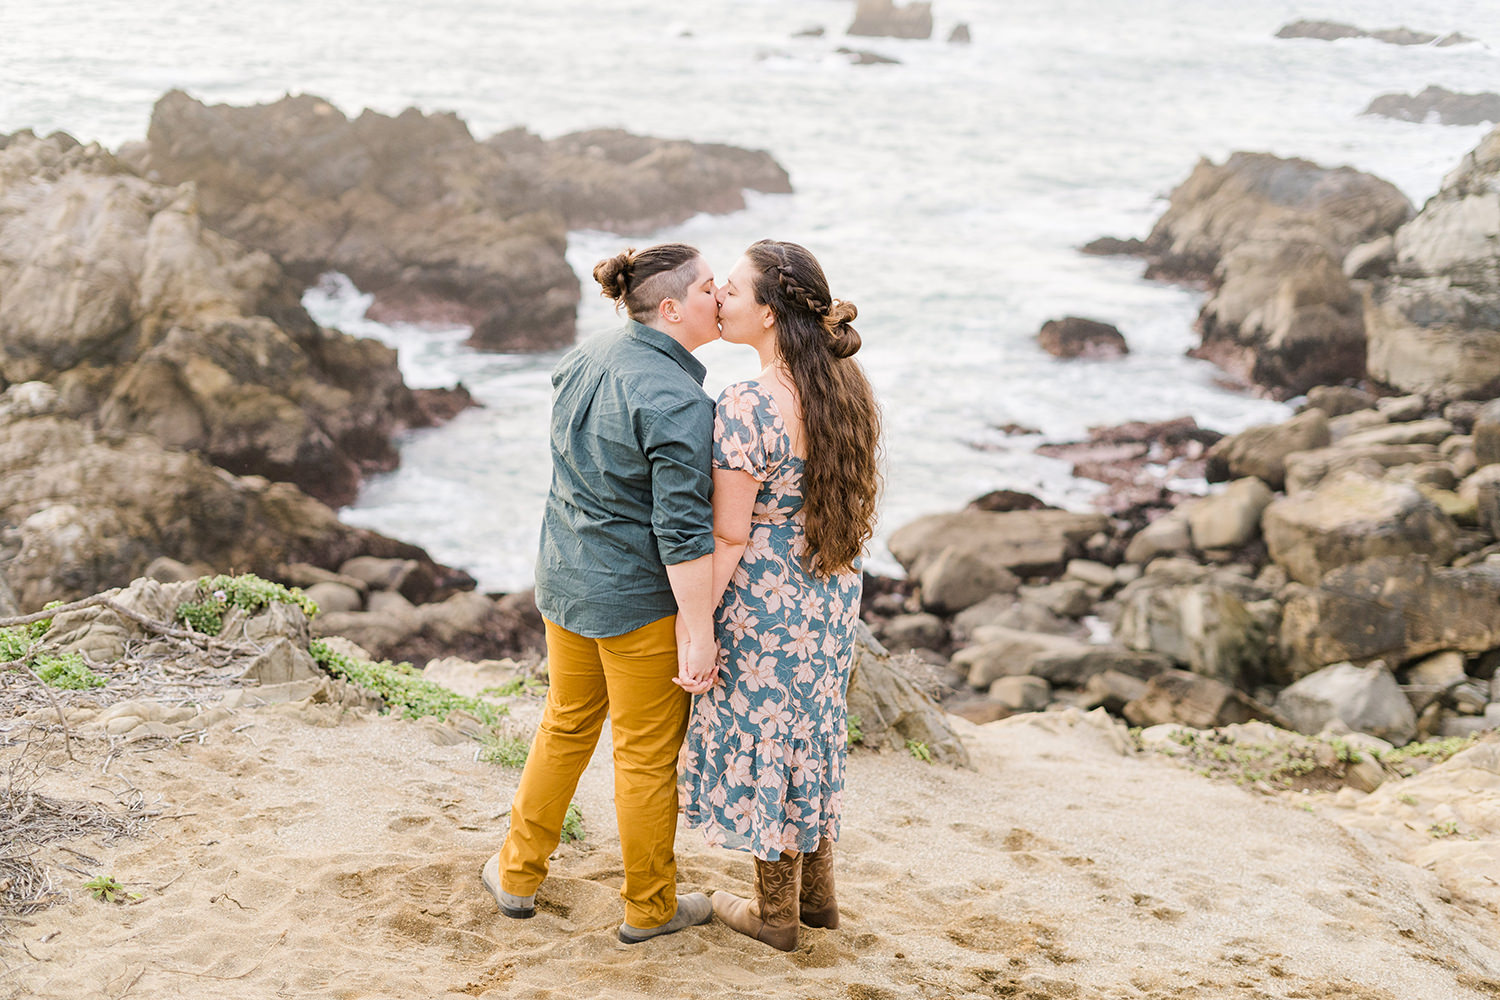 LGBTQIA+ couple shares an intimate moment at their salt point beach engagement session